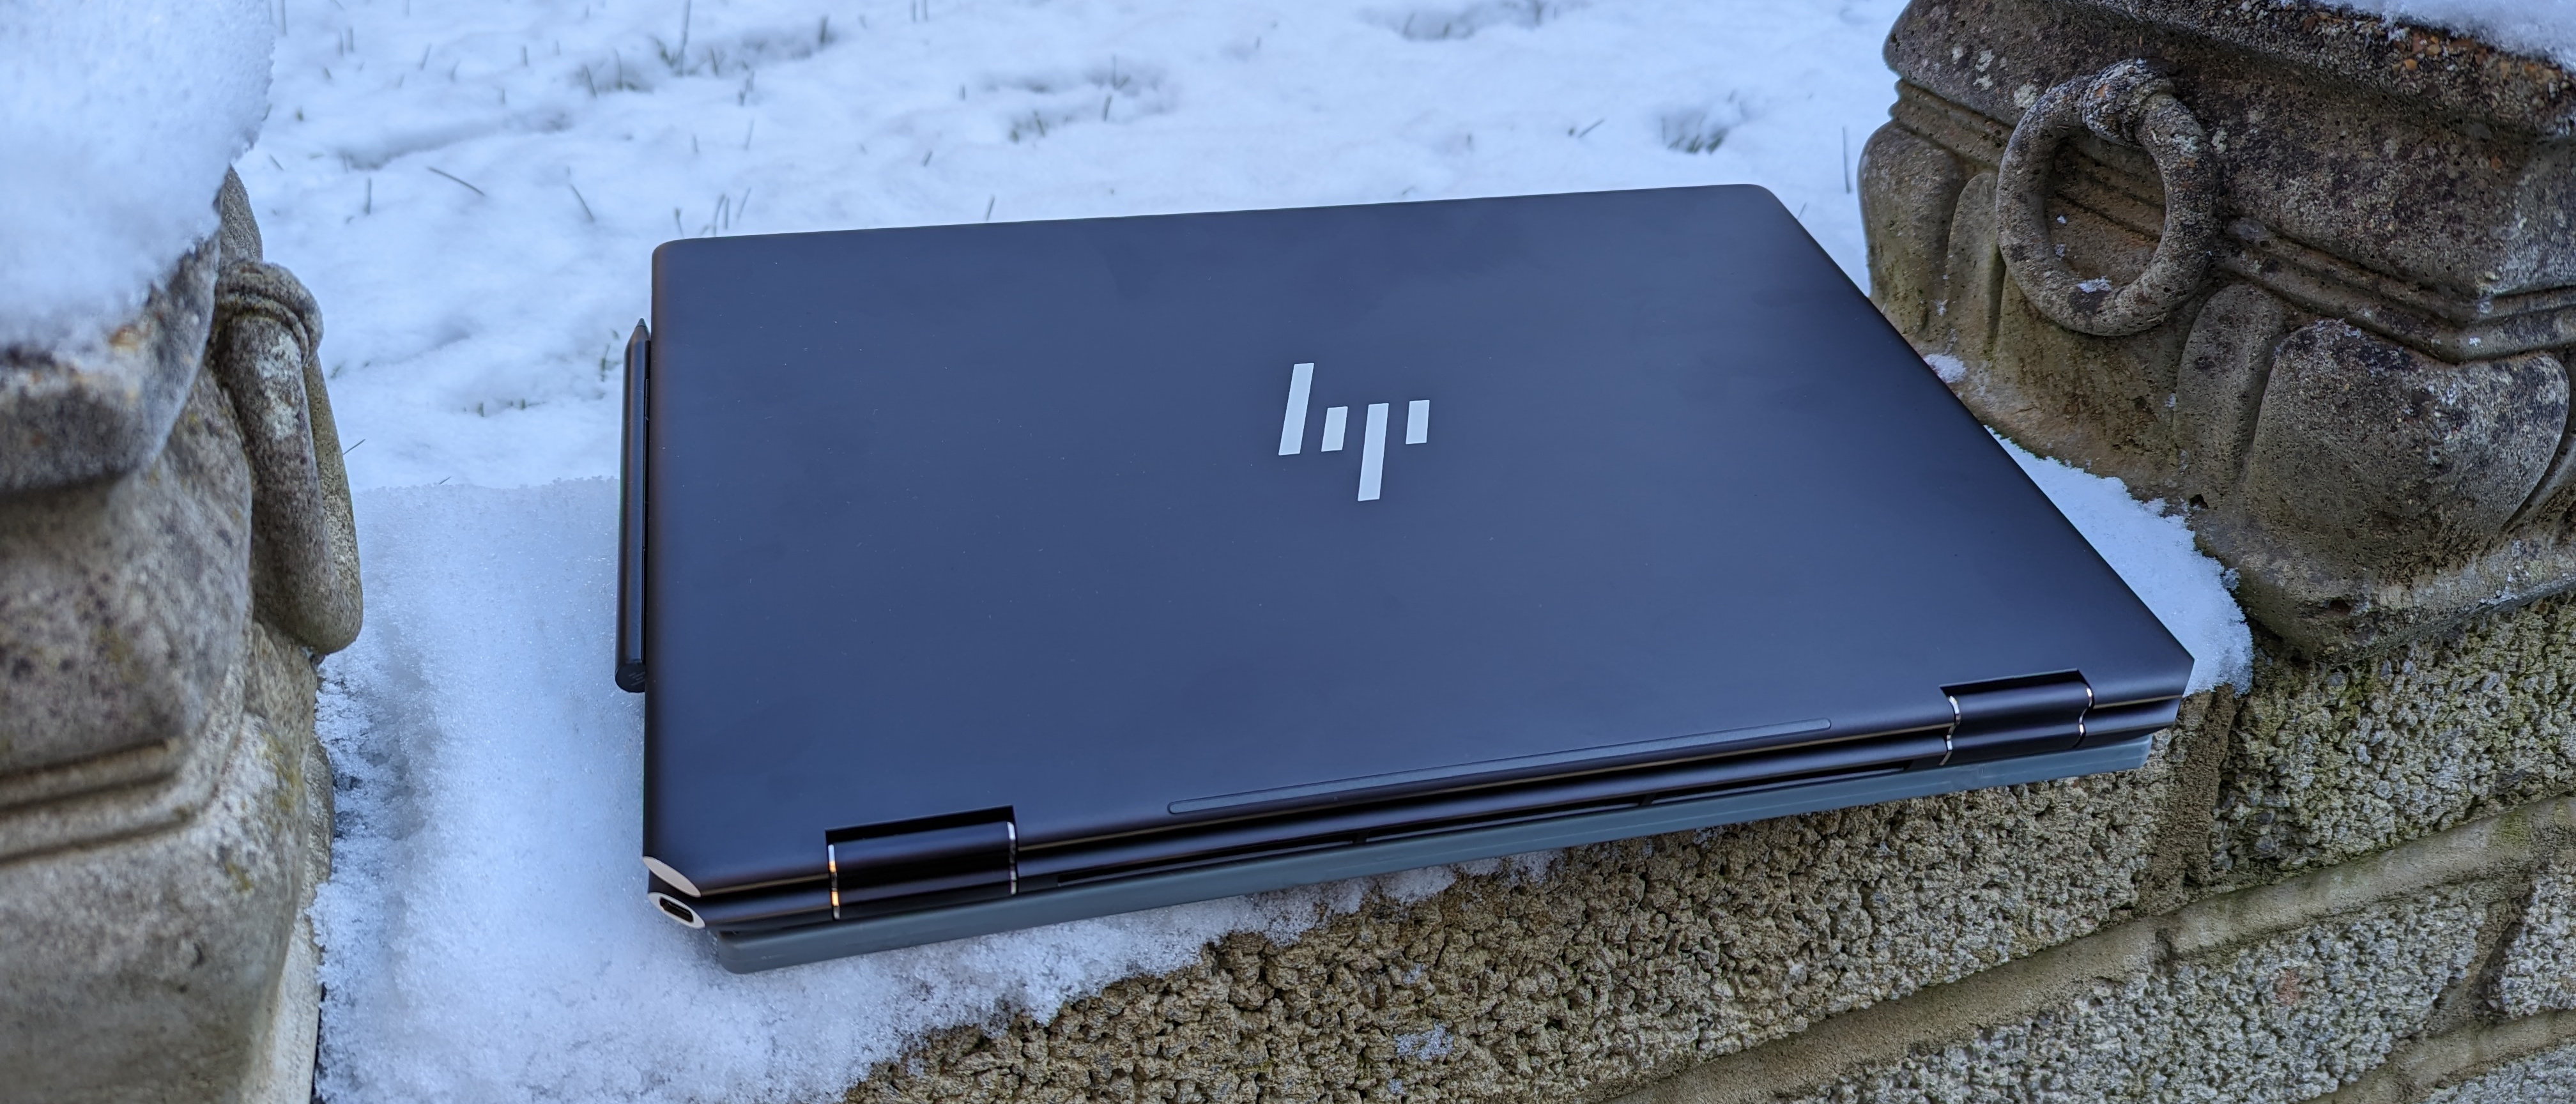 HP Spectre x360 15 Review: A Whole Lot Of Awesome